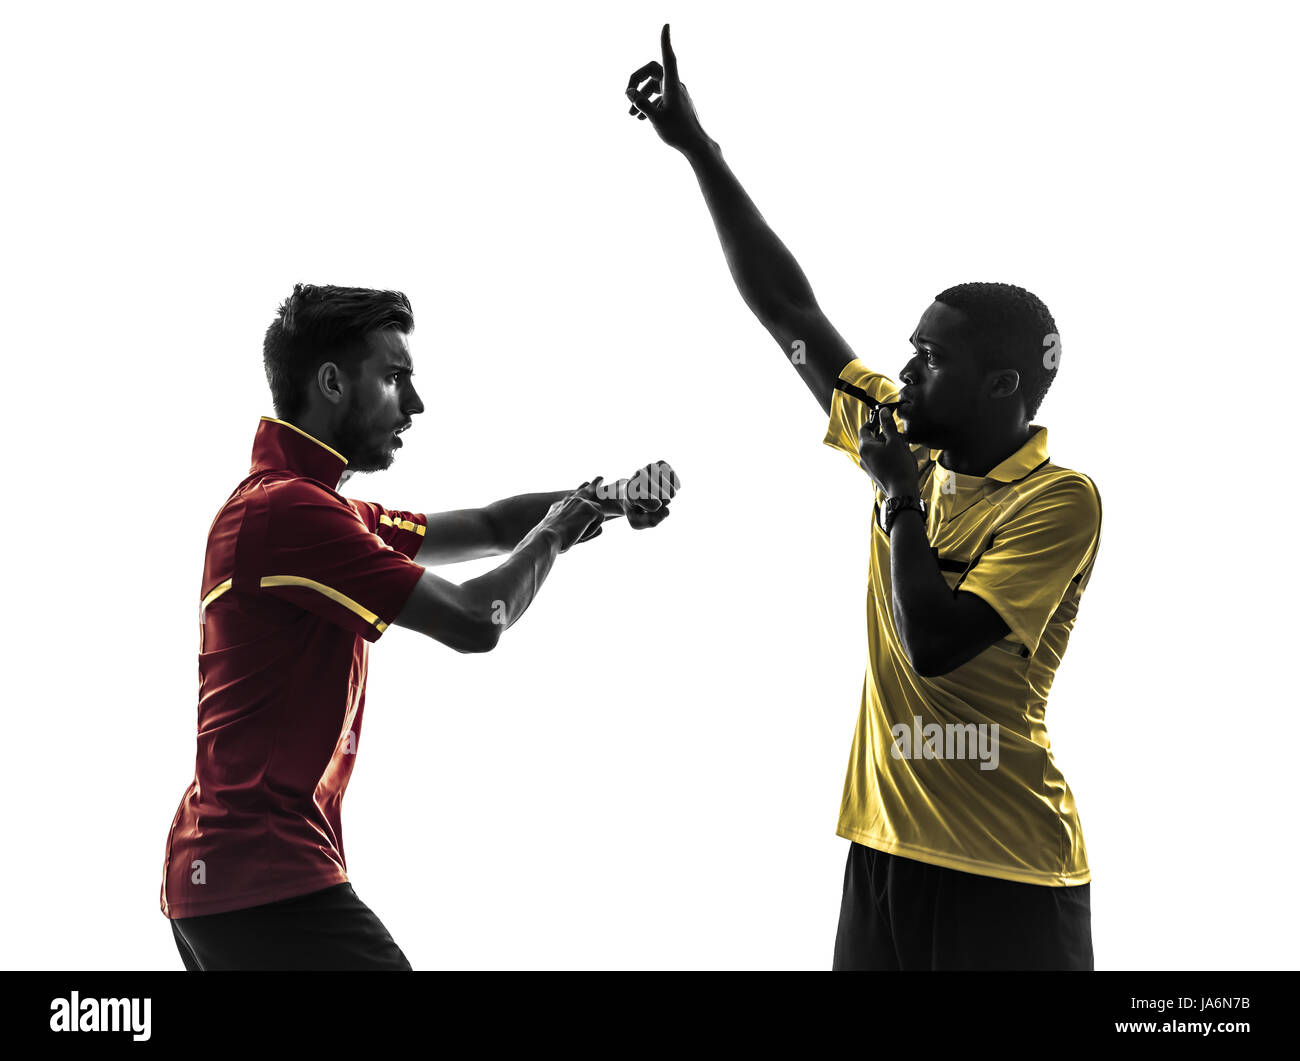 Two Men Soccer Player And Referee Blowing Whistle In Silhouette On